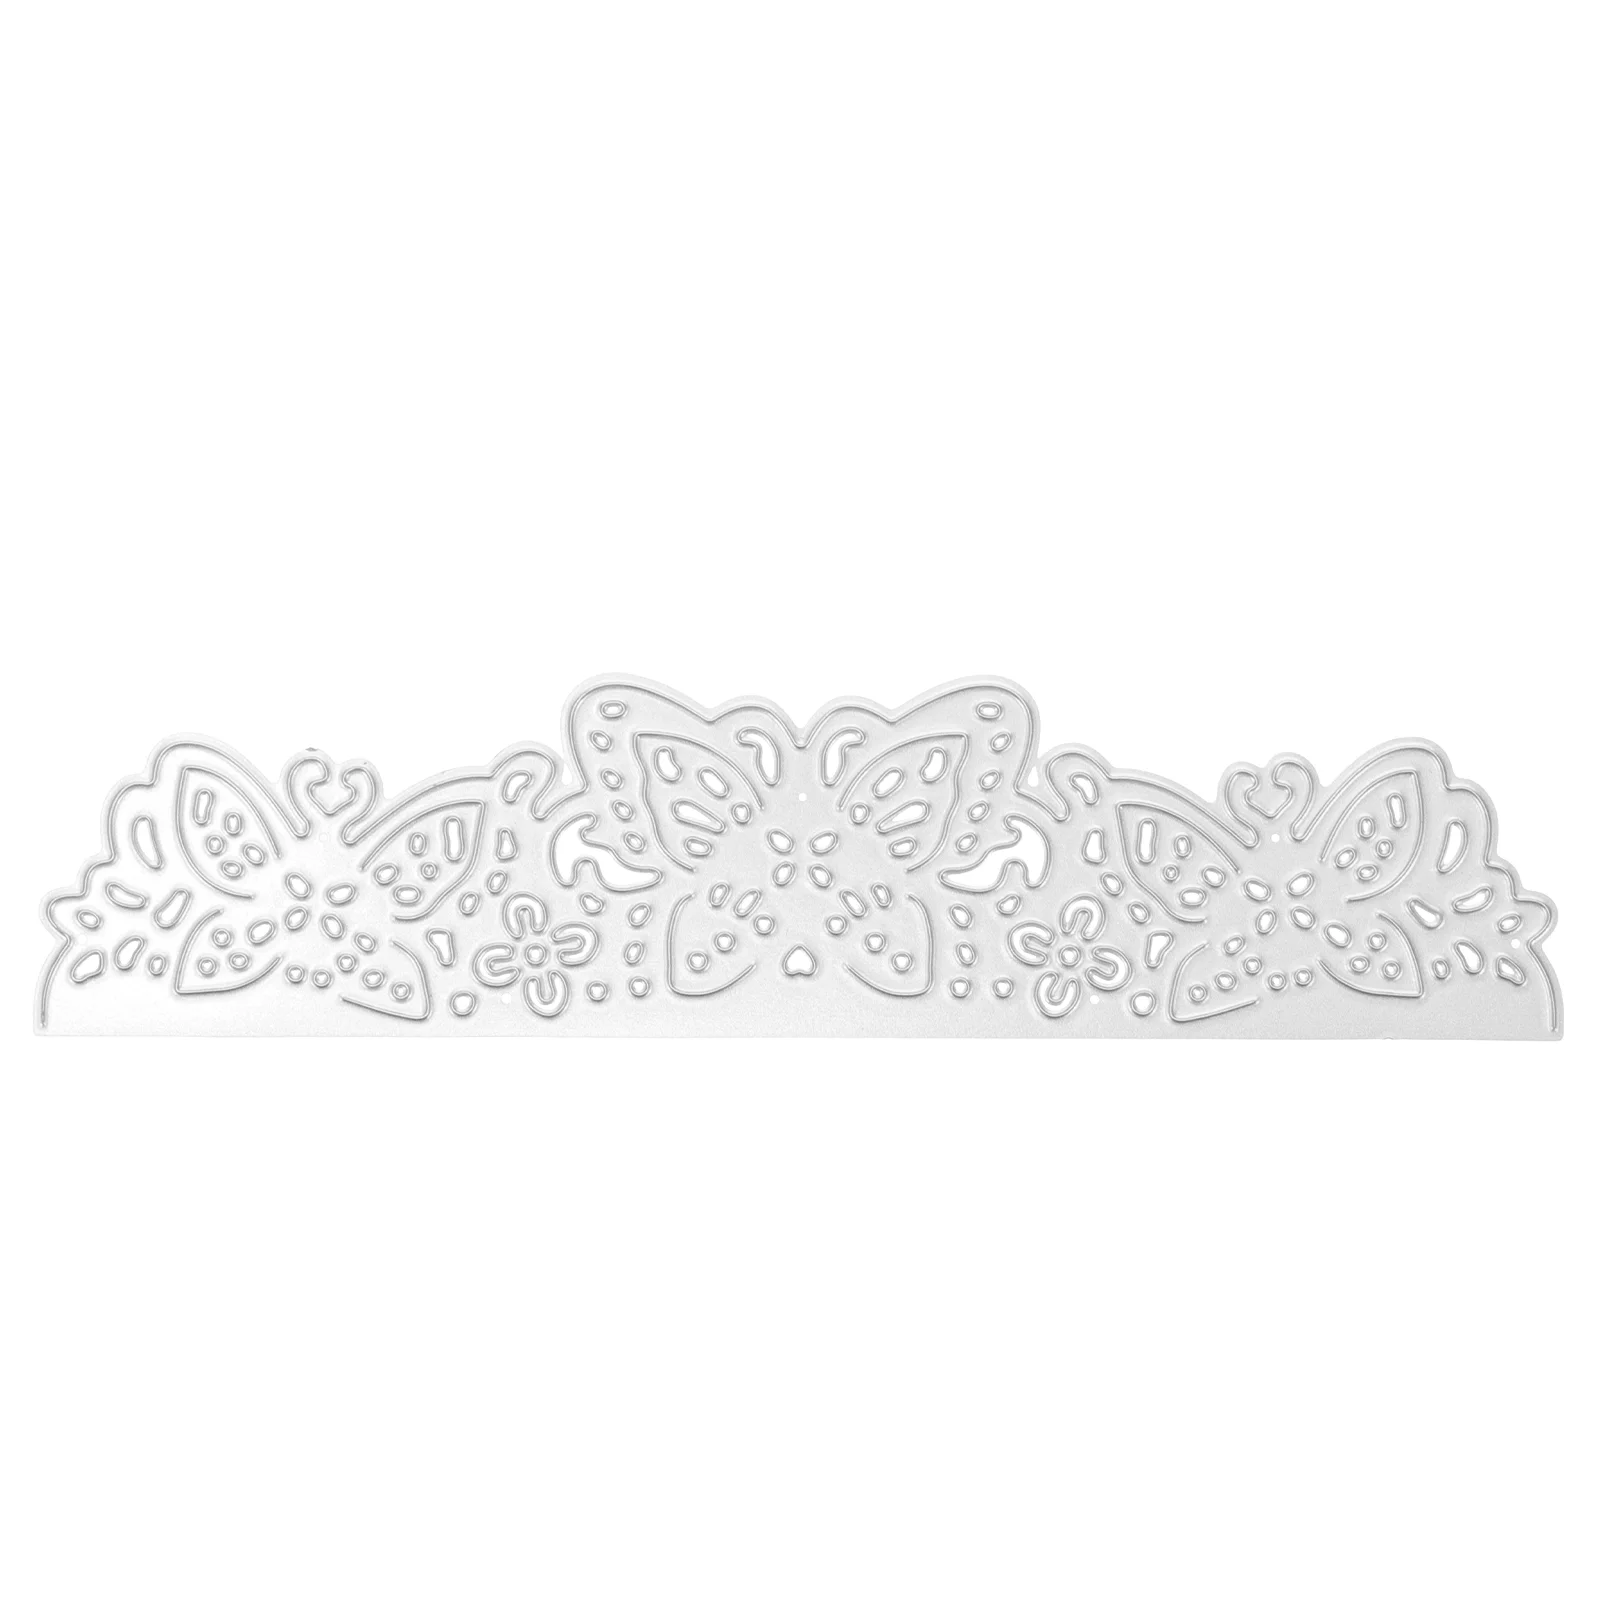 

Stencils Card Making Crafts Lace Delicate Cutting Dies Embossing Folders Carbon Steel Decor Metal Cuts Tools